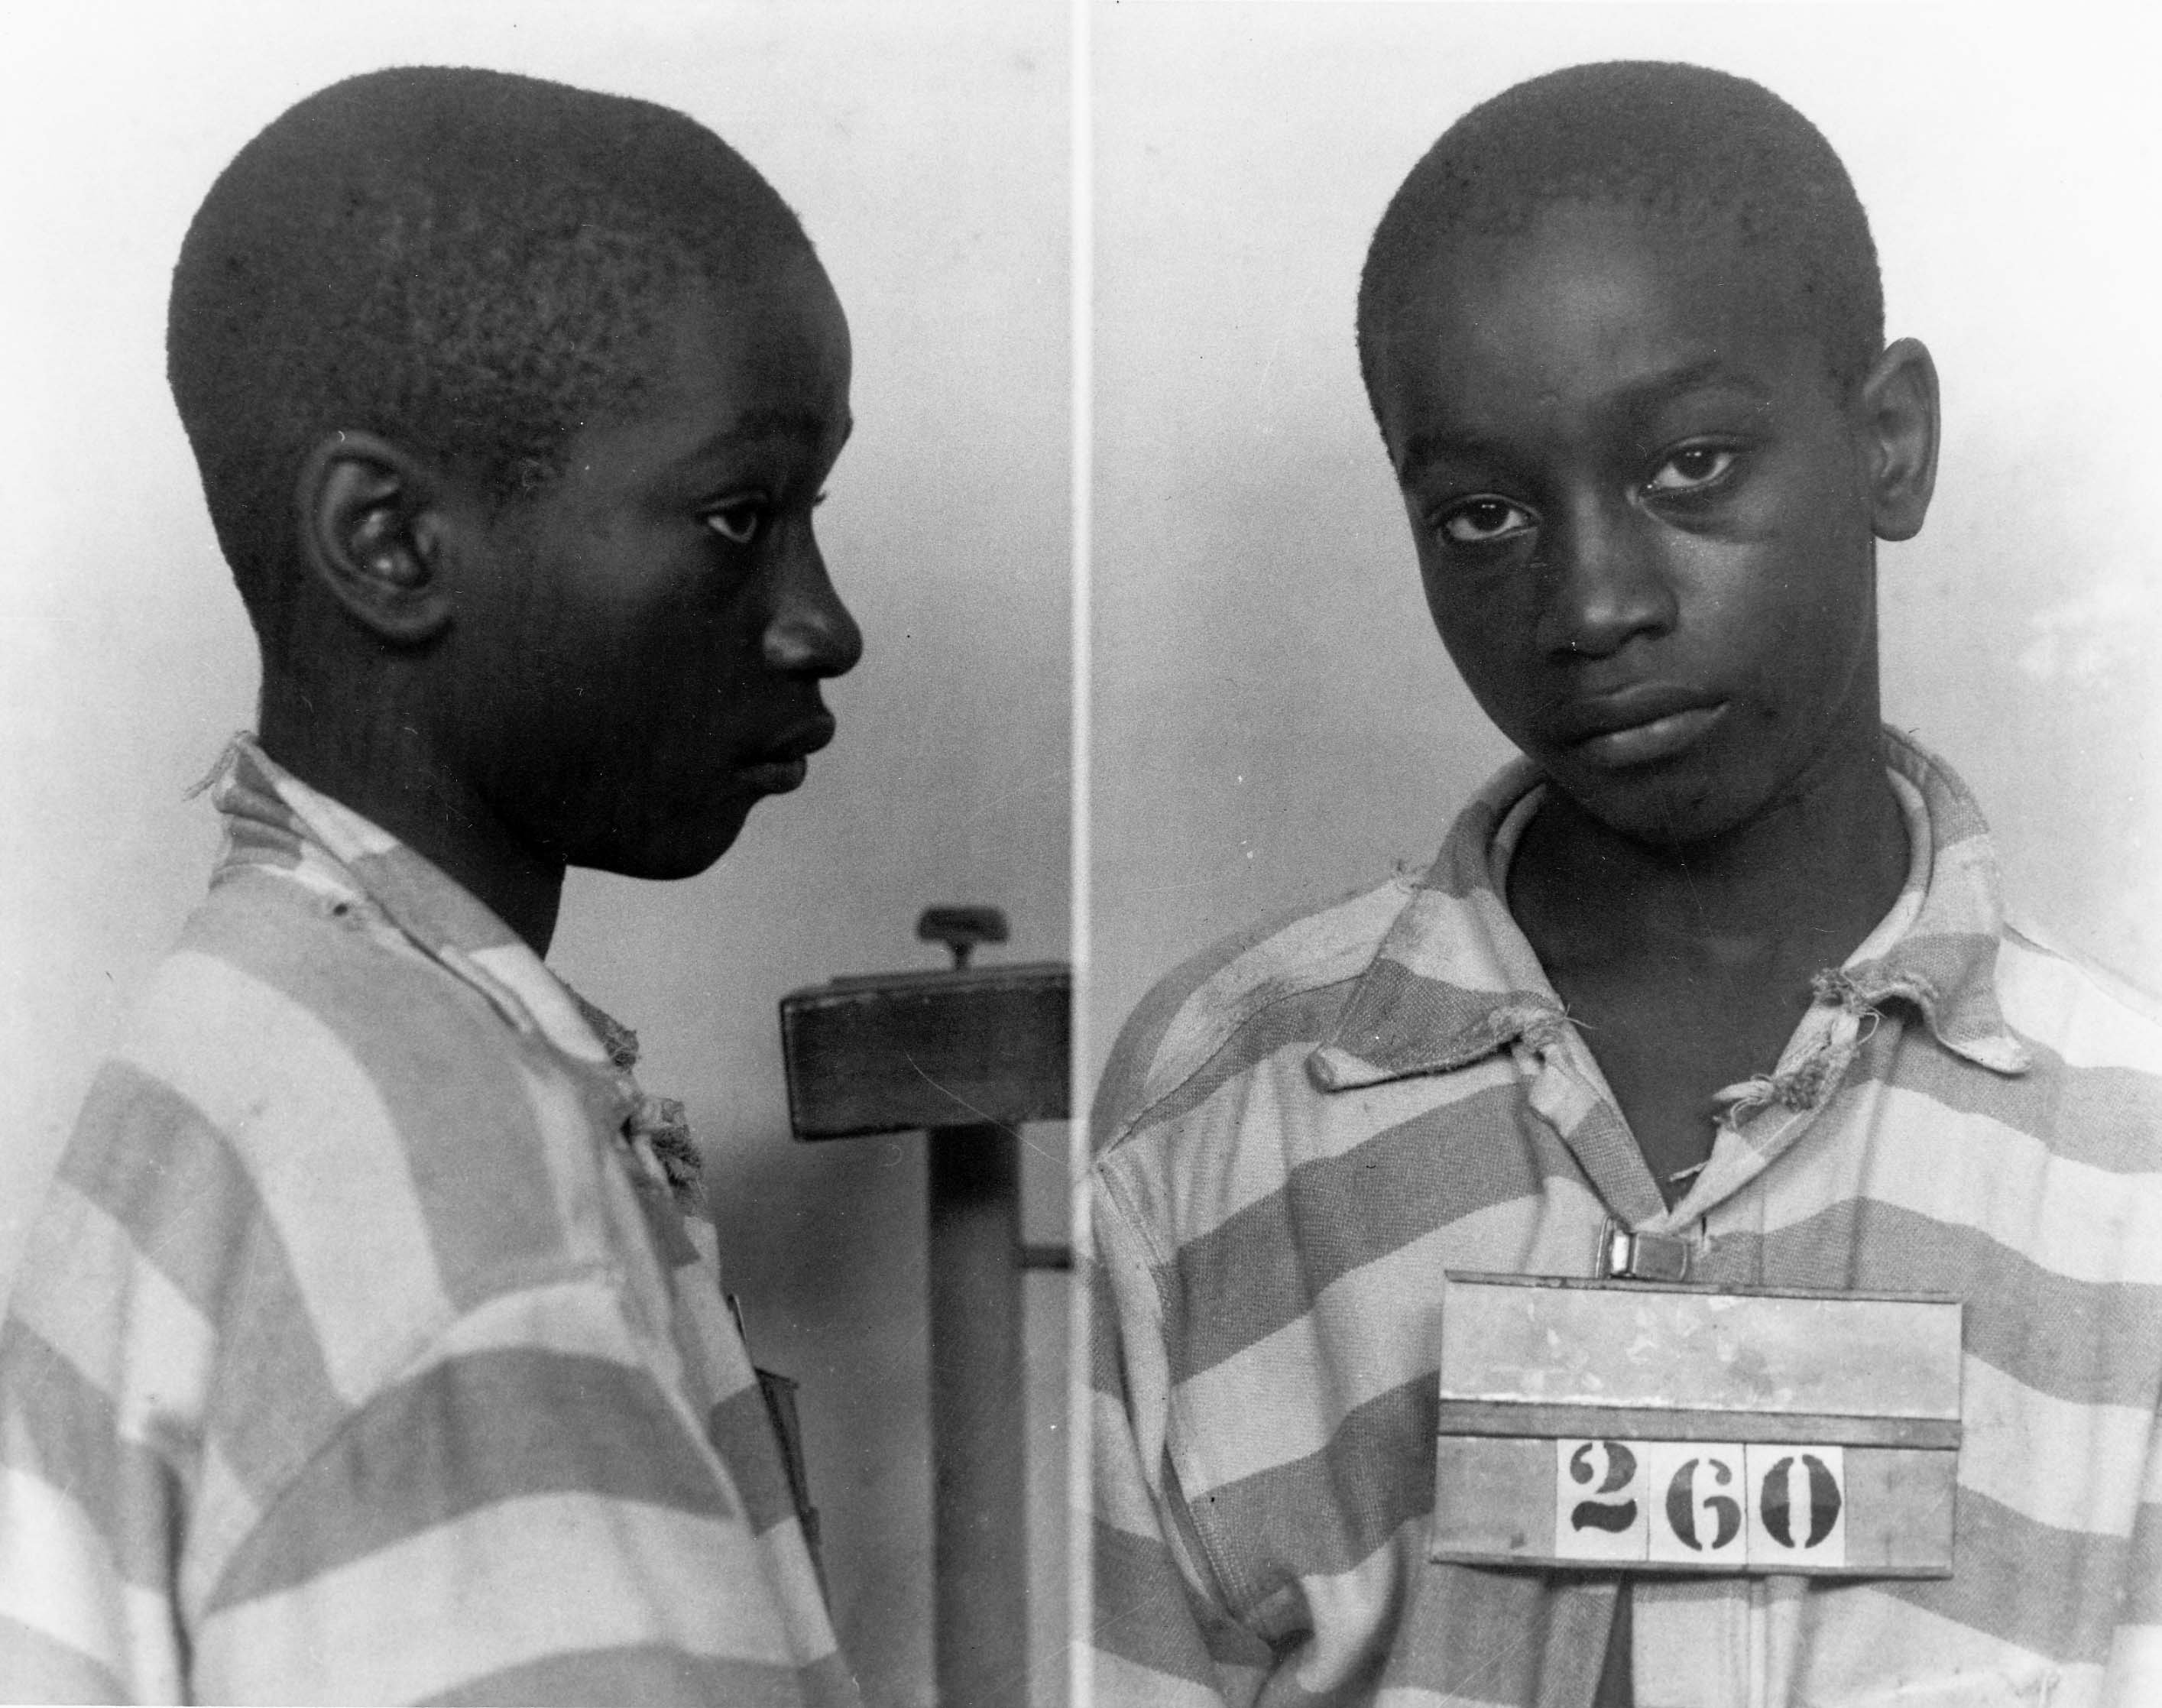 George Stinney Jr appears in an undated police booking photo provided by the South Carolina Department of Archives and History